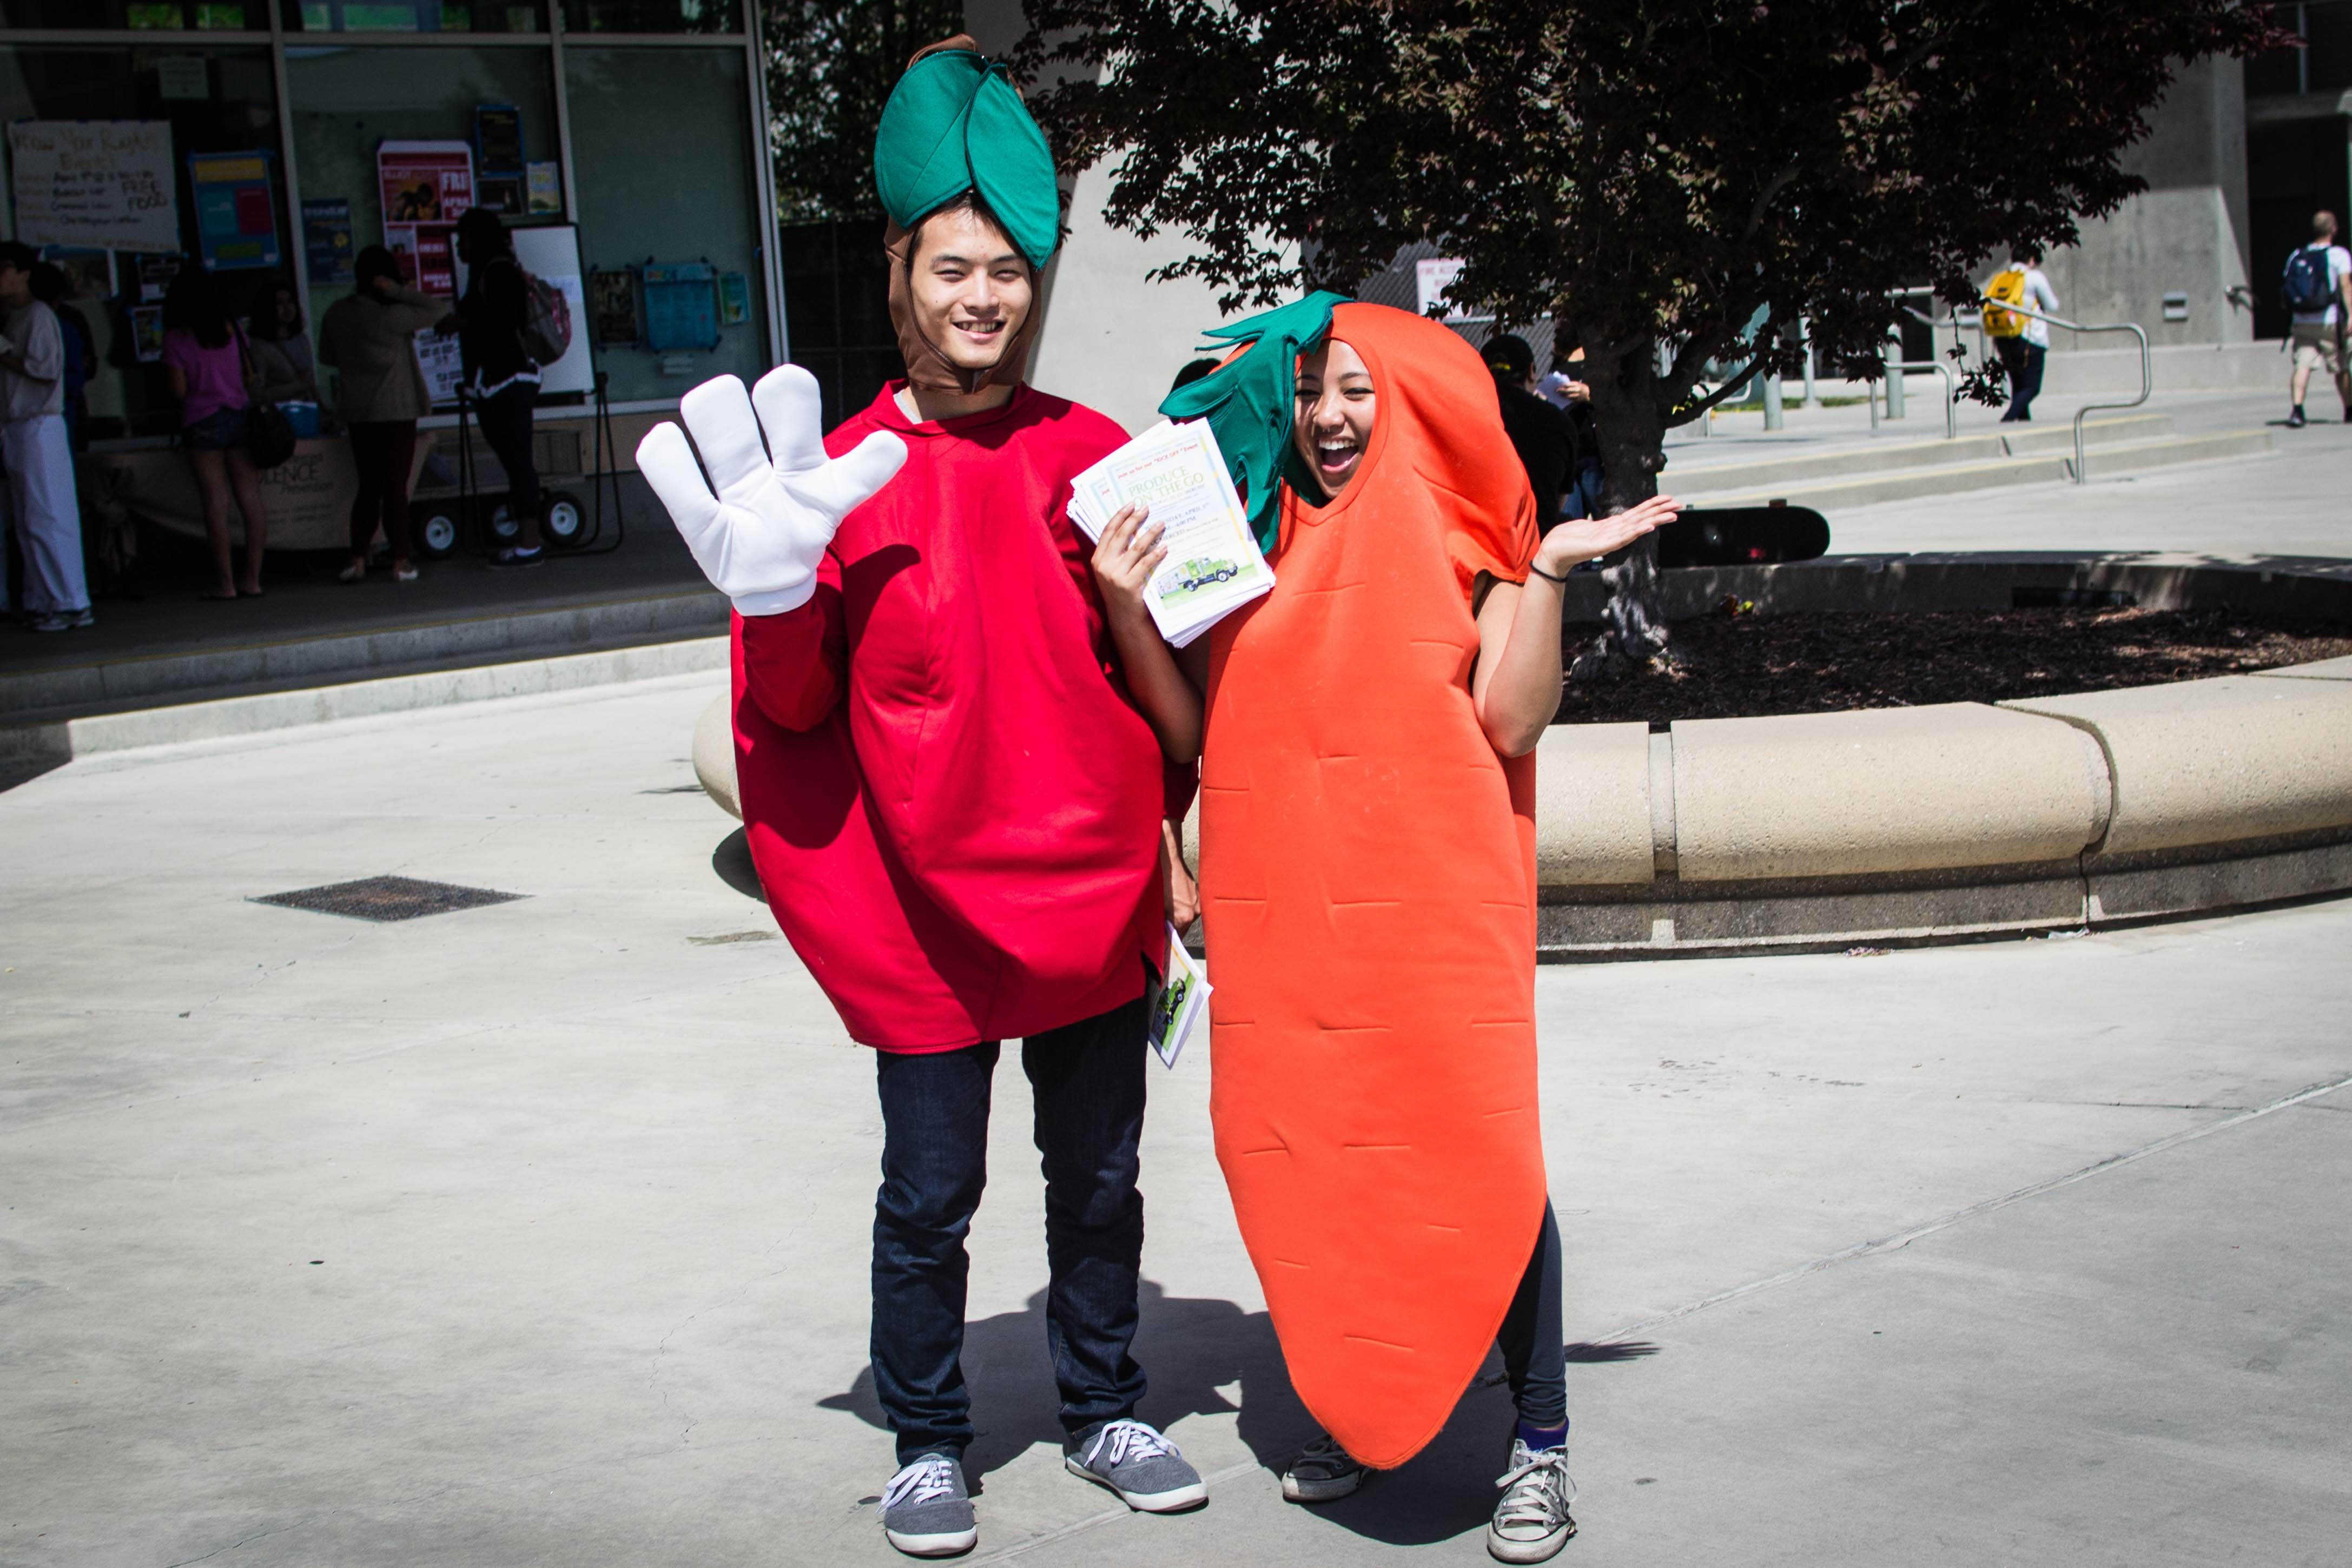 The Carrot and the Apple advertise for Produce on the Go.